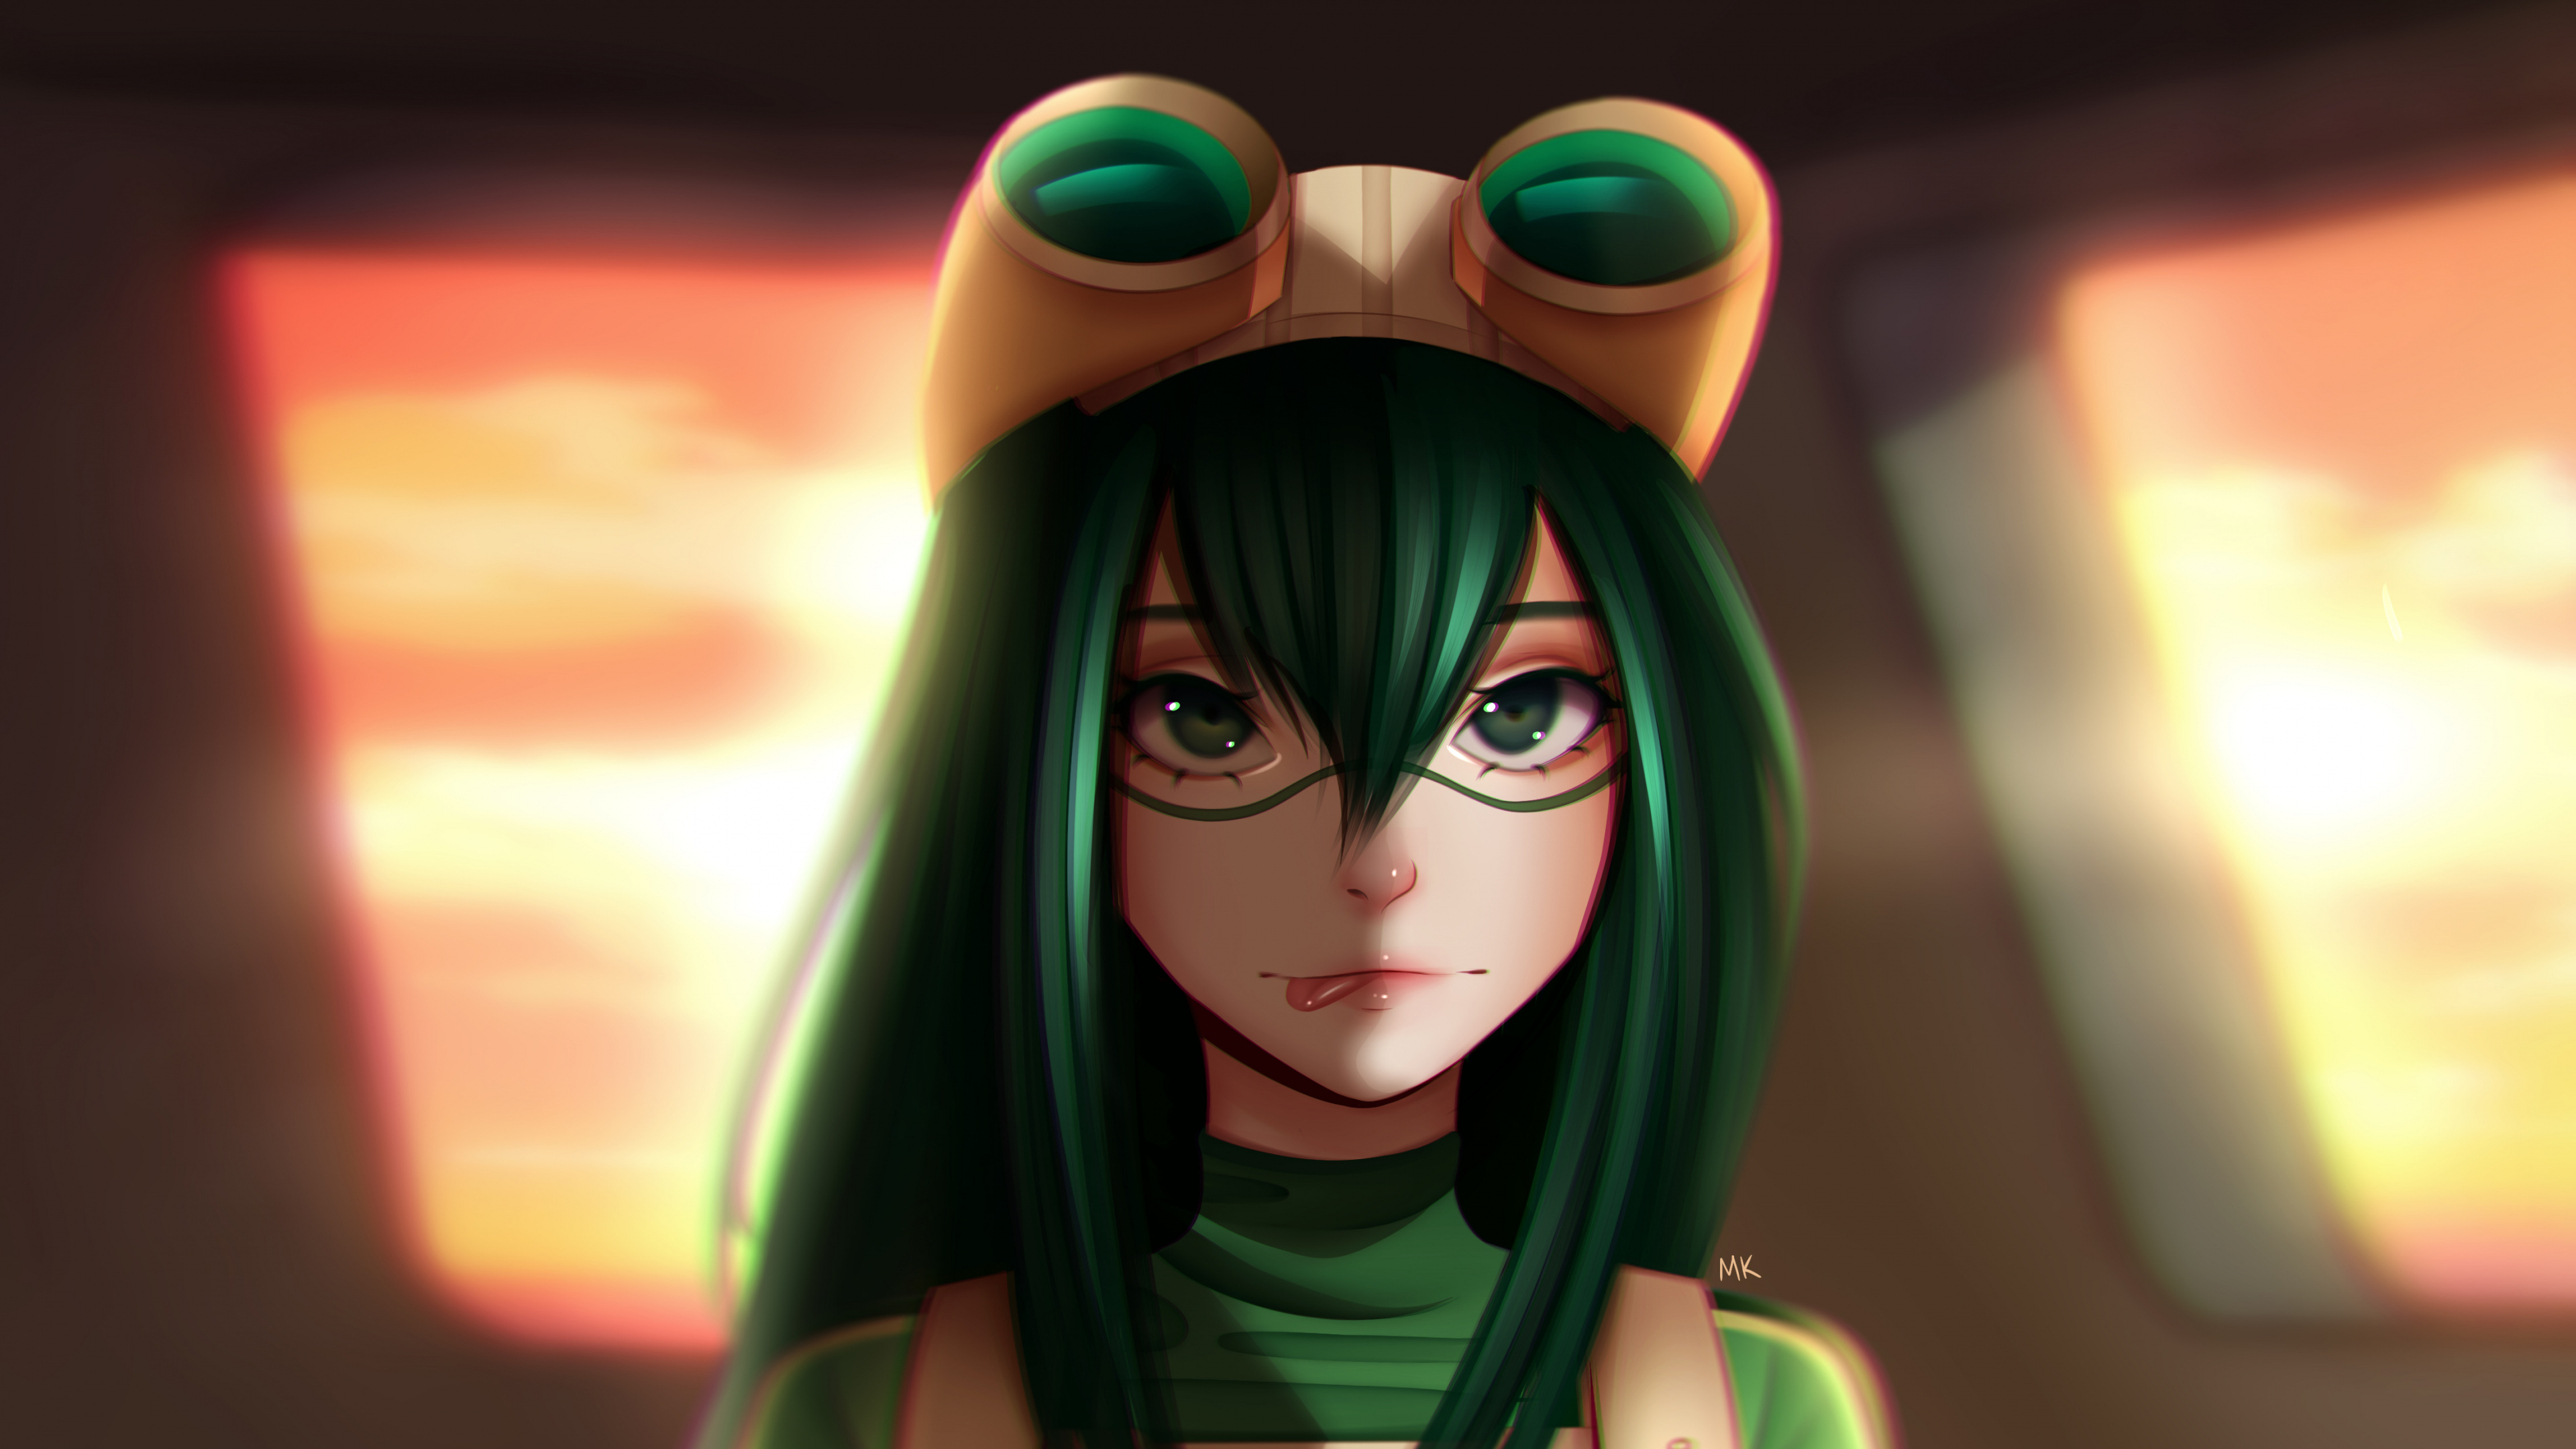 Personnage D'anime Féminin Aux Cheveux Verts. Wallpaper in 3840x2160 Resolution